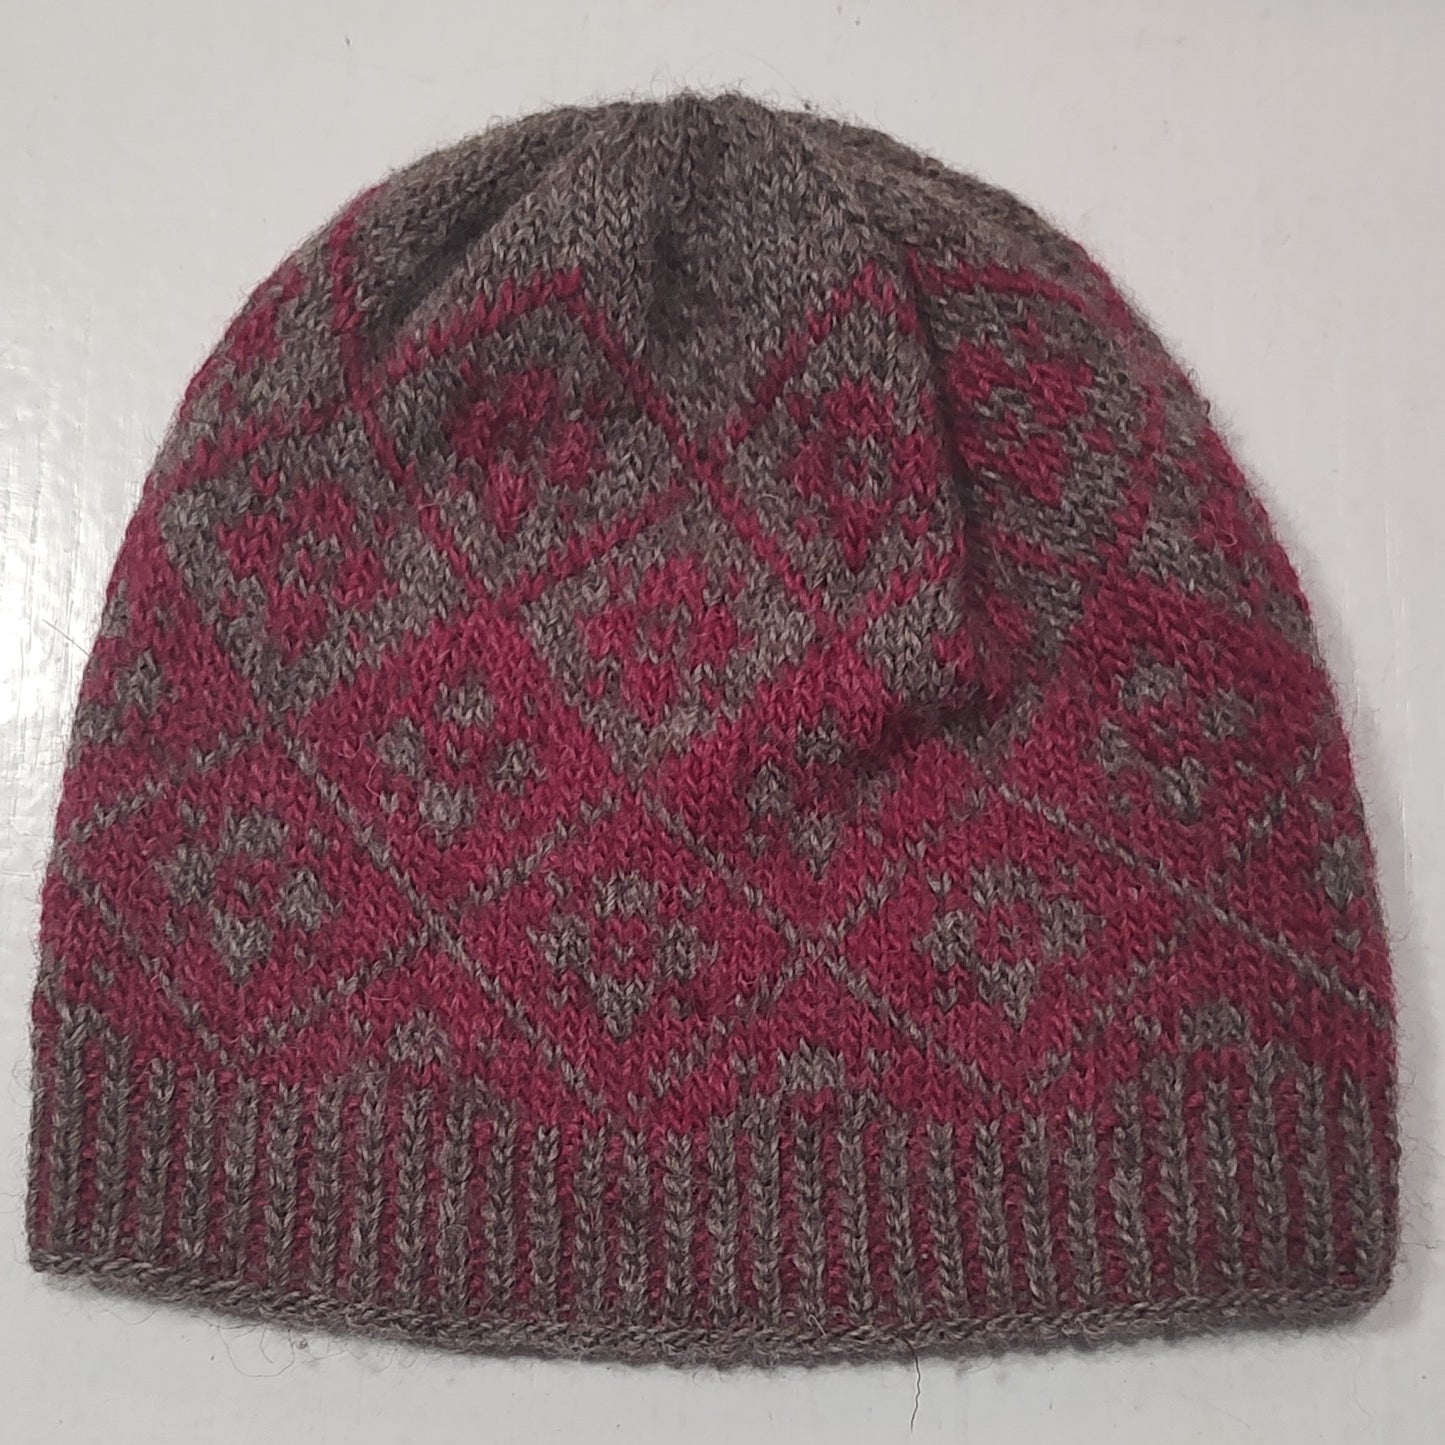 Knitted Hat - colourwork pink and warm grey